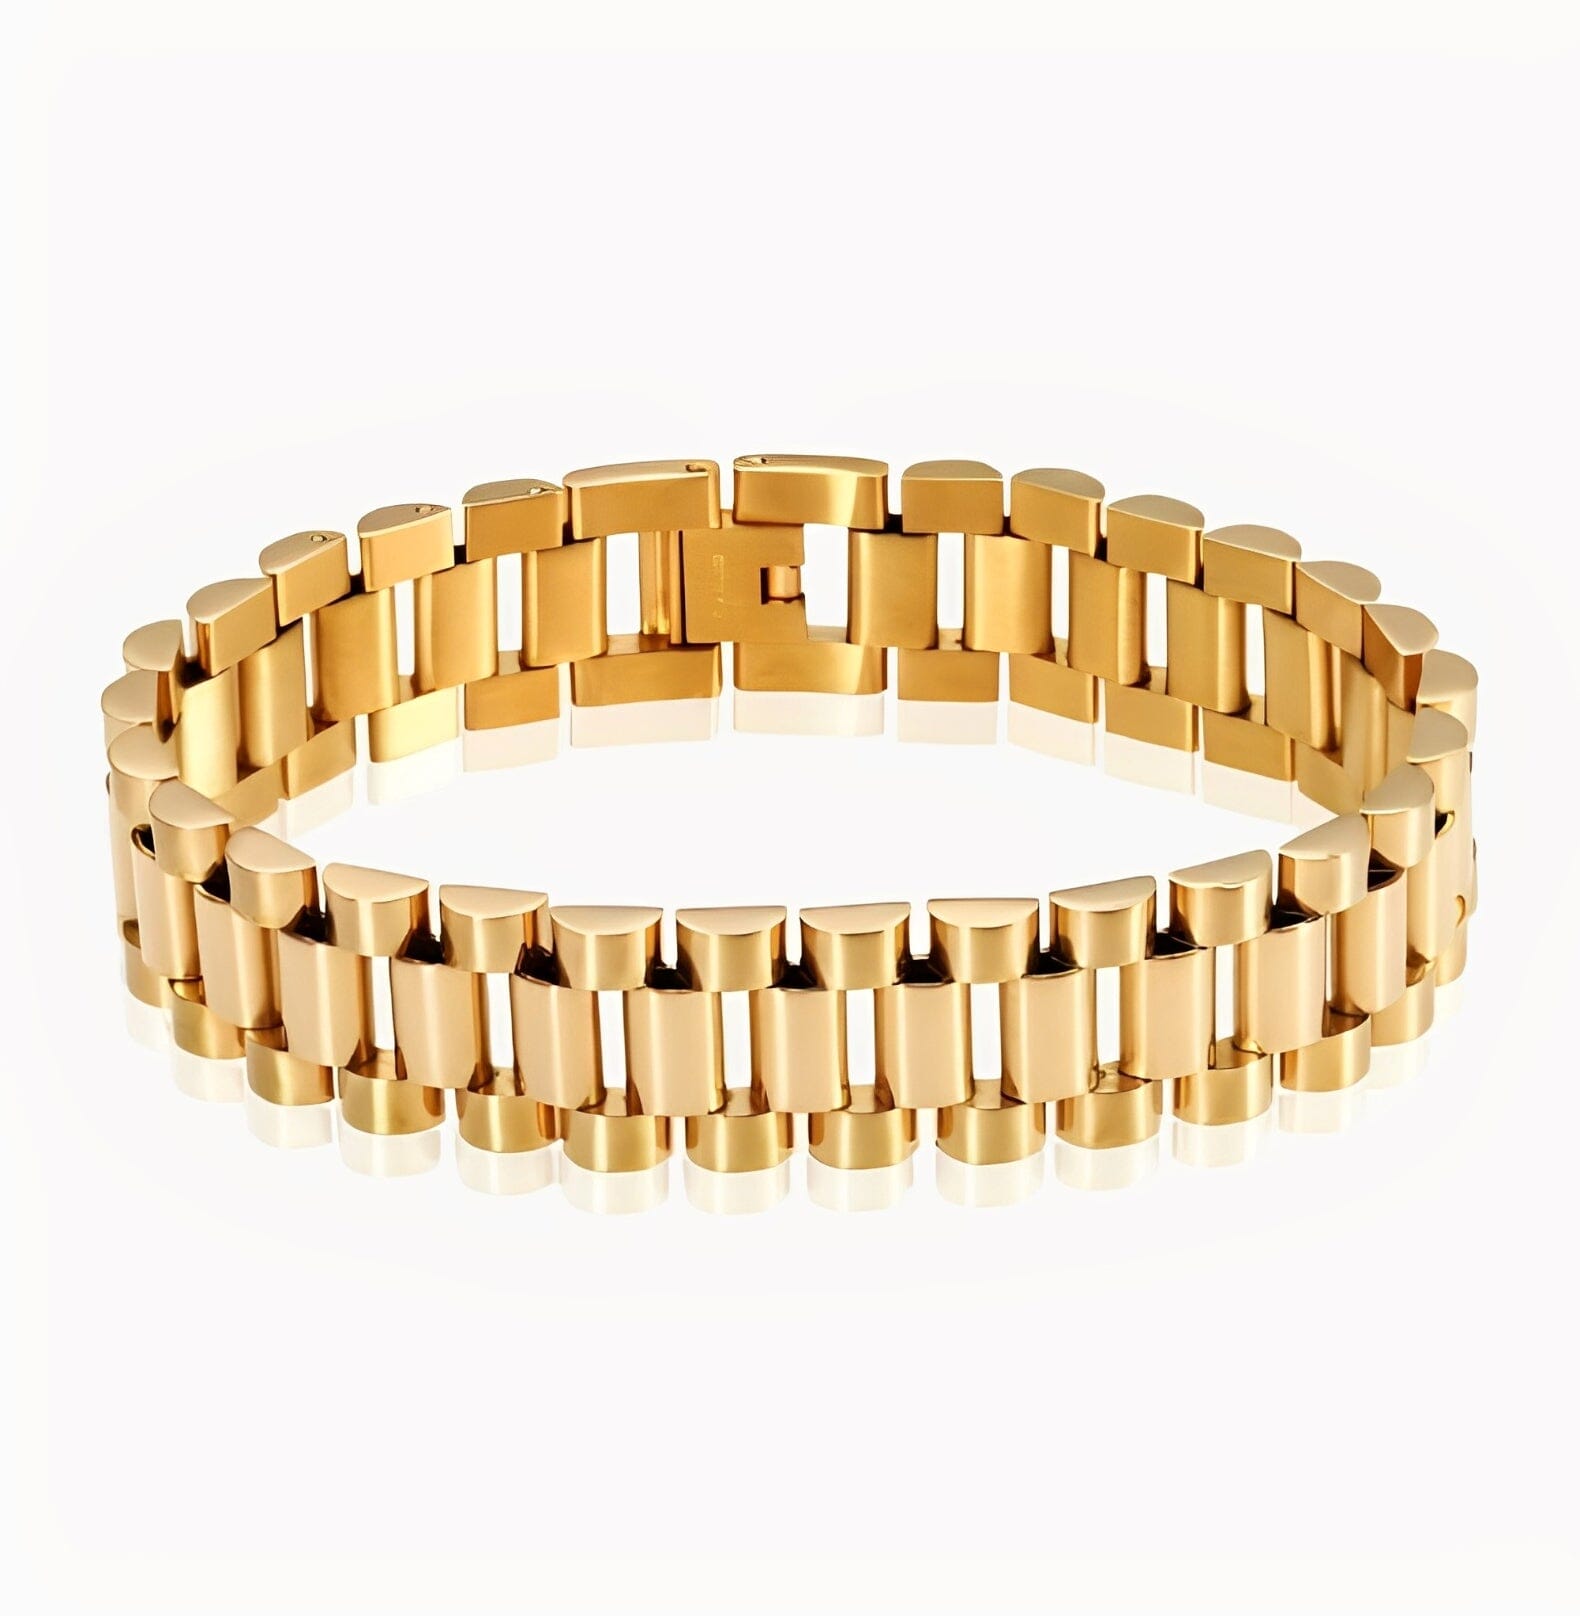 WATCH STRAP BRACELET braclet Yubama Jewelry Online Store - The Elegant Designs of Gold and Silver ! 